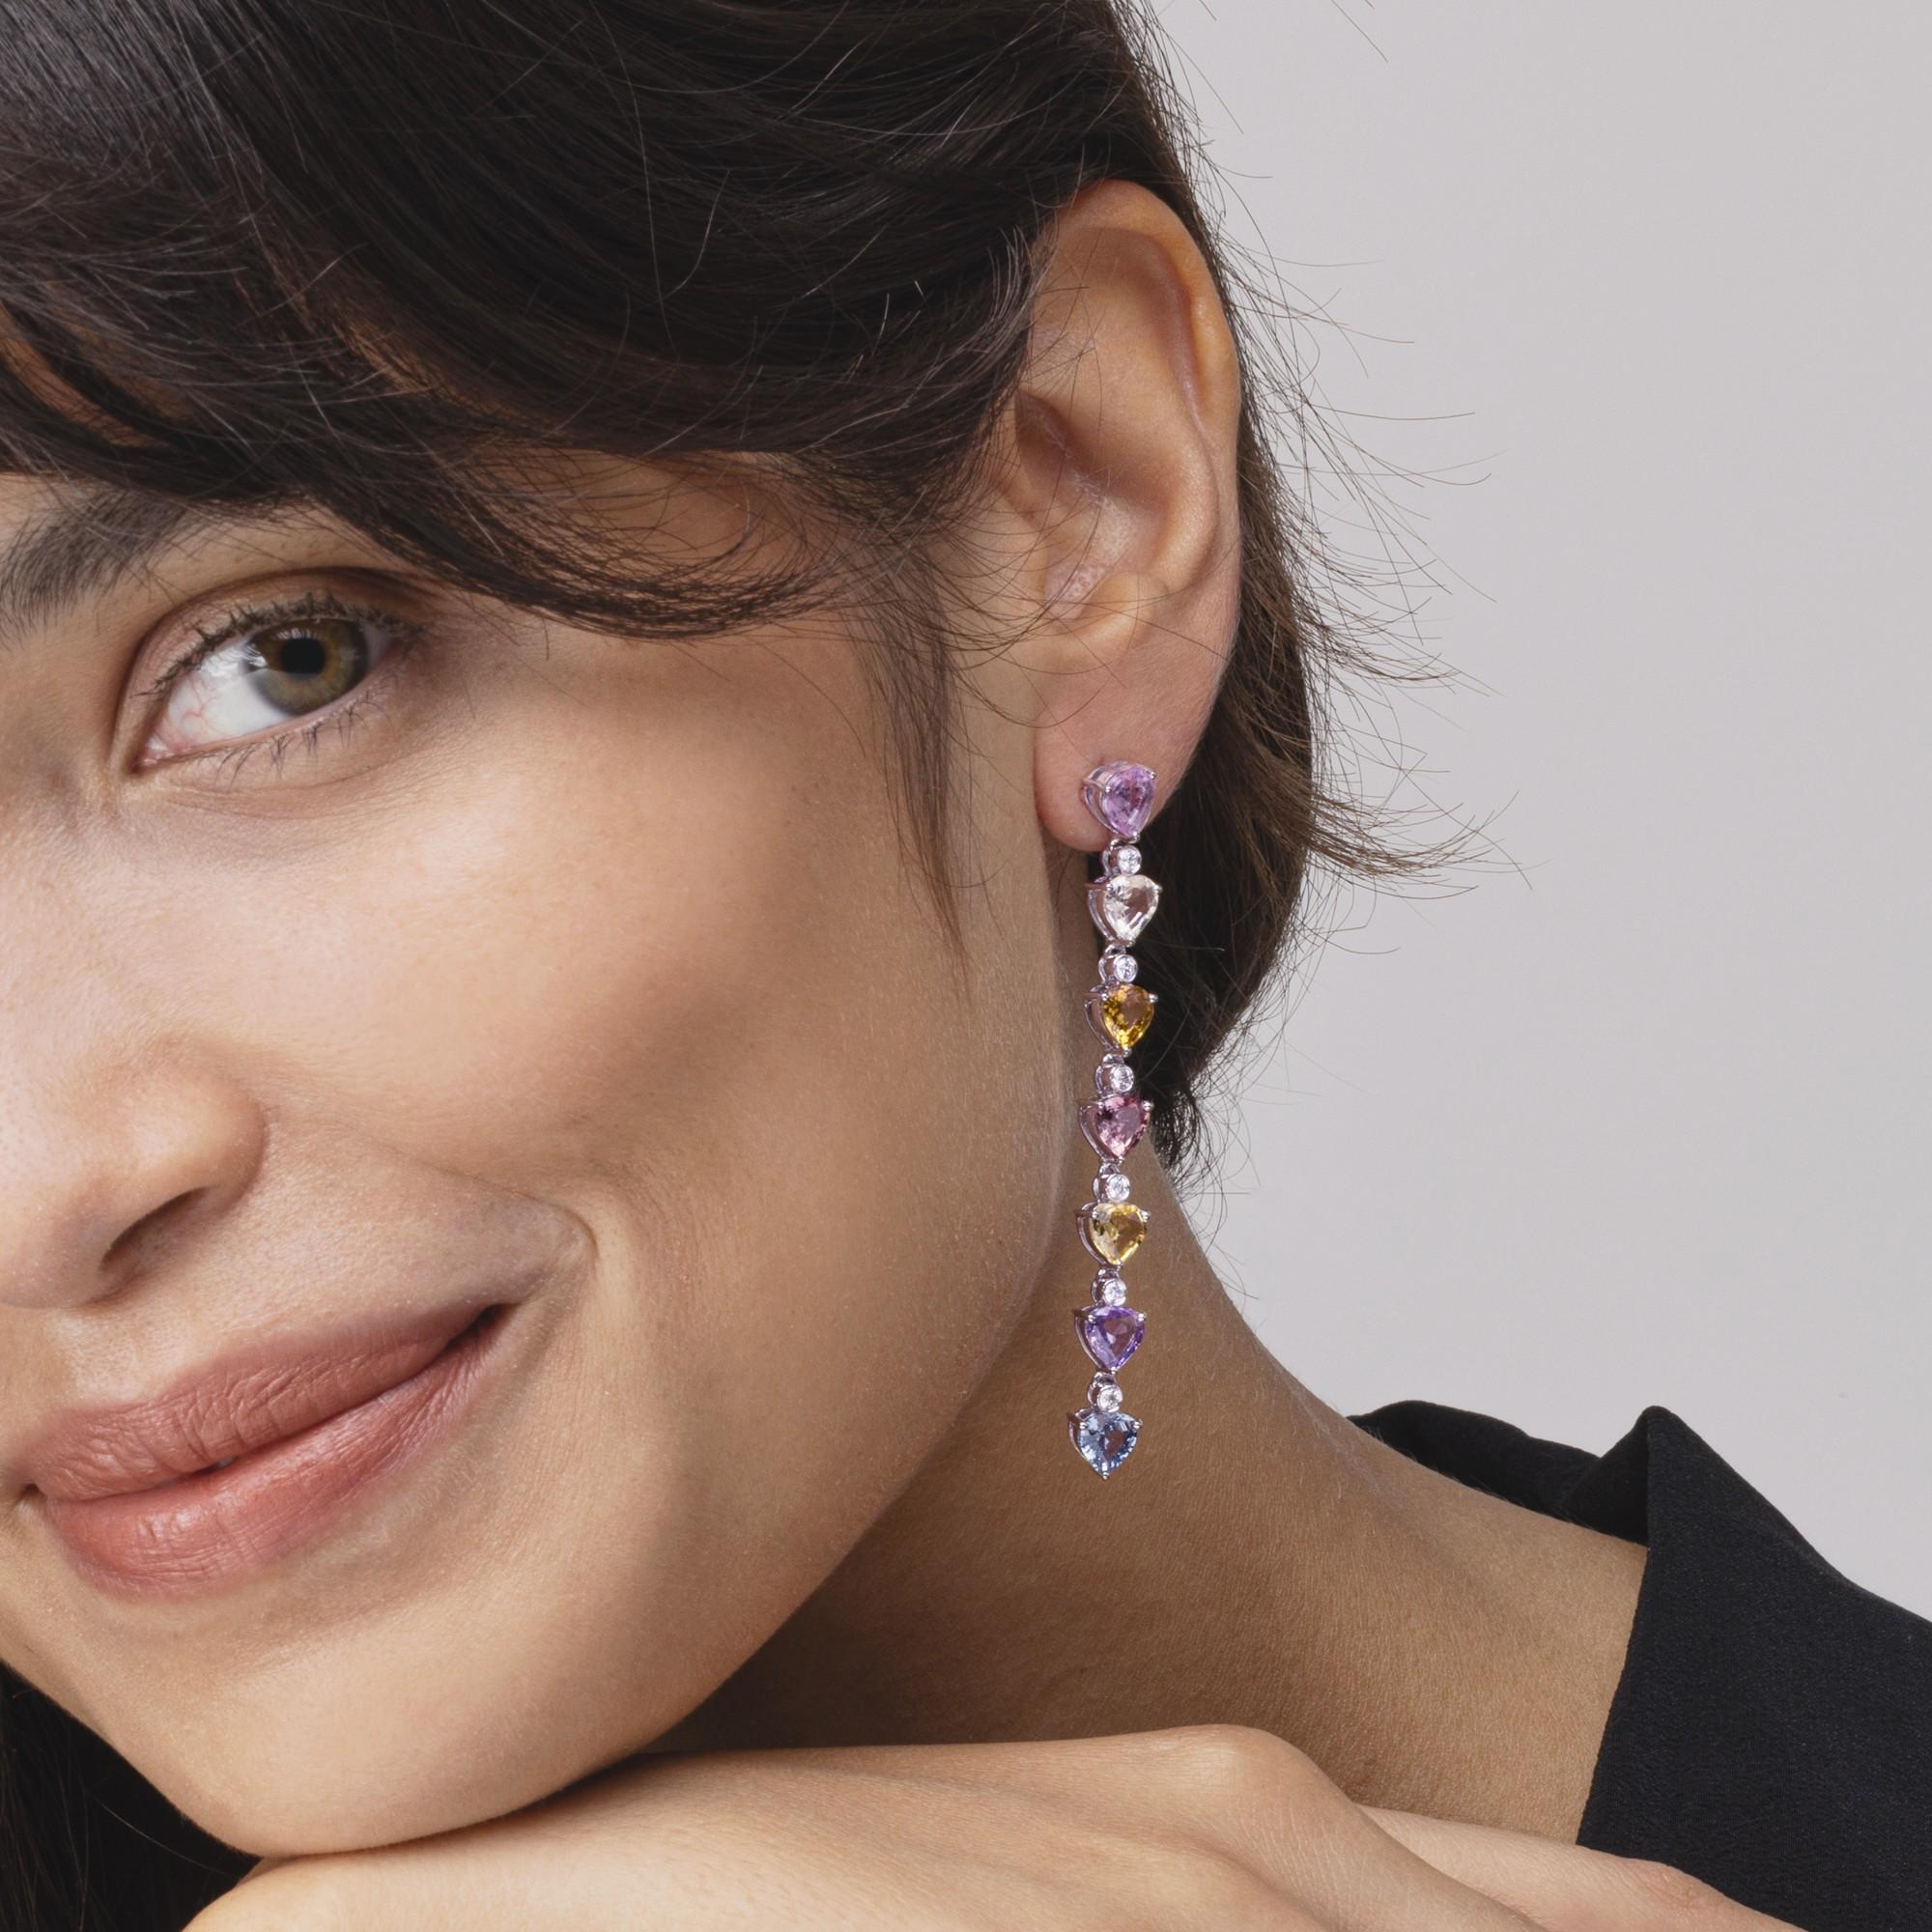 Alex Jona design collection, hand crafted in Italy,  long drop earrings consisting of a waterfall of 14 multicolor drop shape multicolor sapphires, weighing 12.17 carats in total and 12 white diamonds for total carats 0.49.

Alex Jona jewels stand